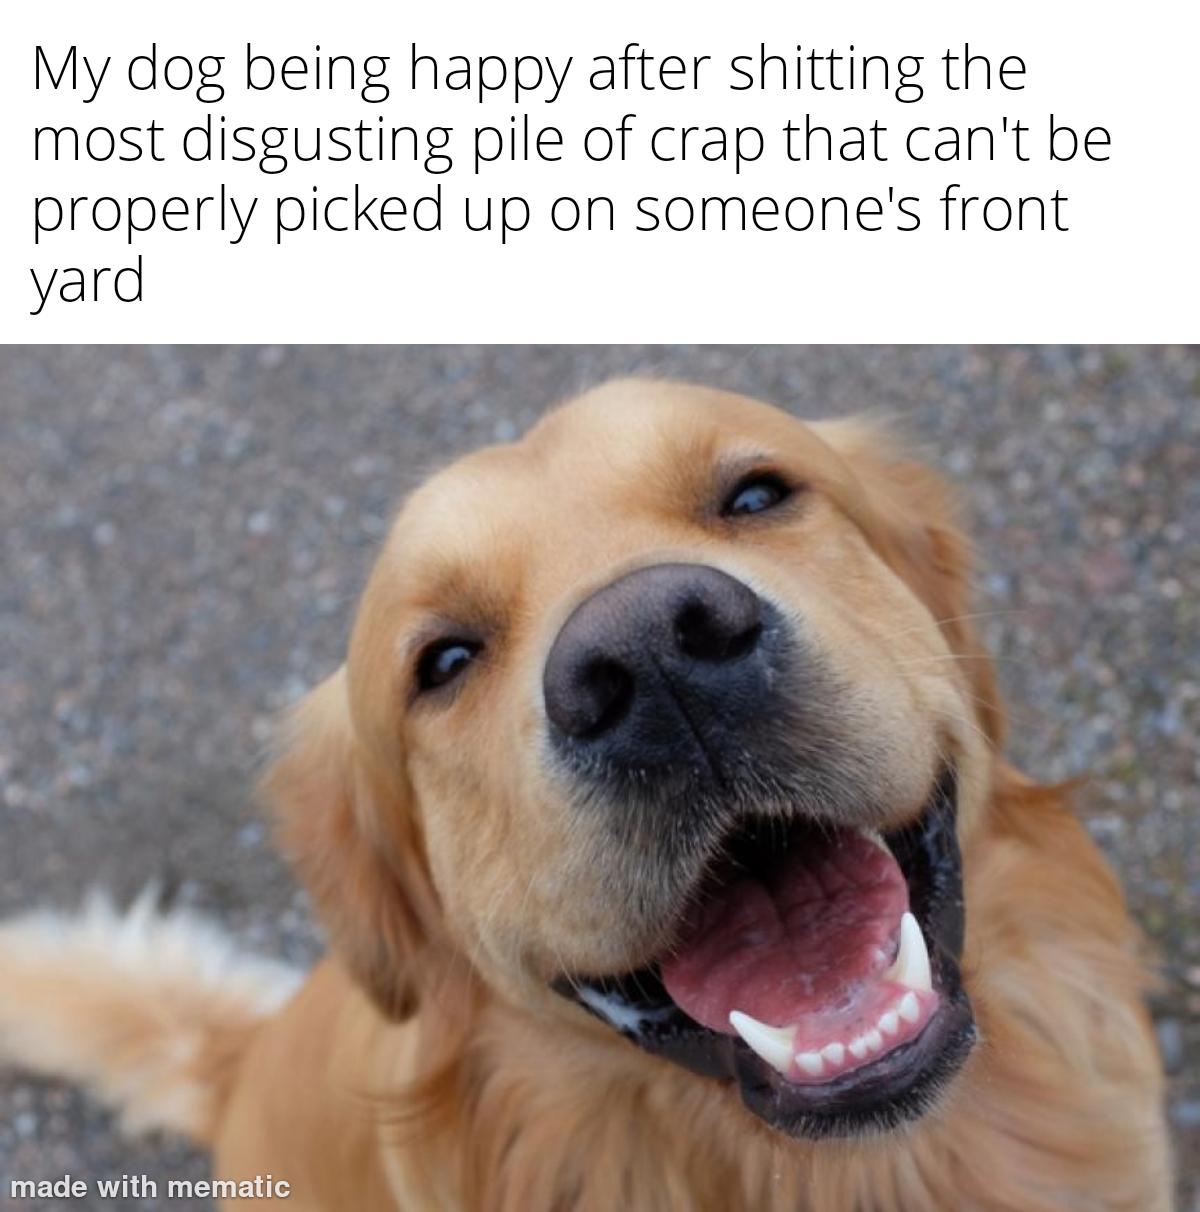 dank memes - happy dog - My dog being happy after shitting the most disgusting pile of crap that can't be properly picked up on someone's front yard made with mematic